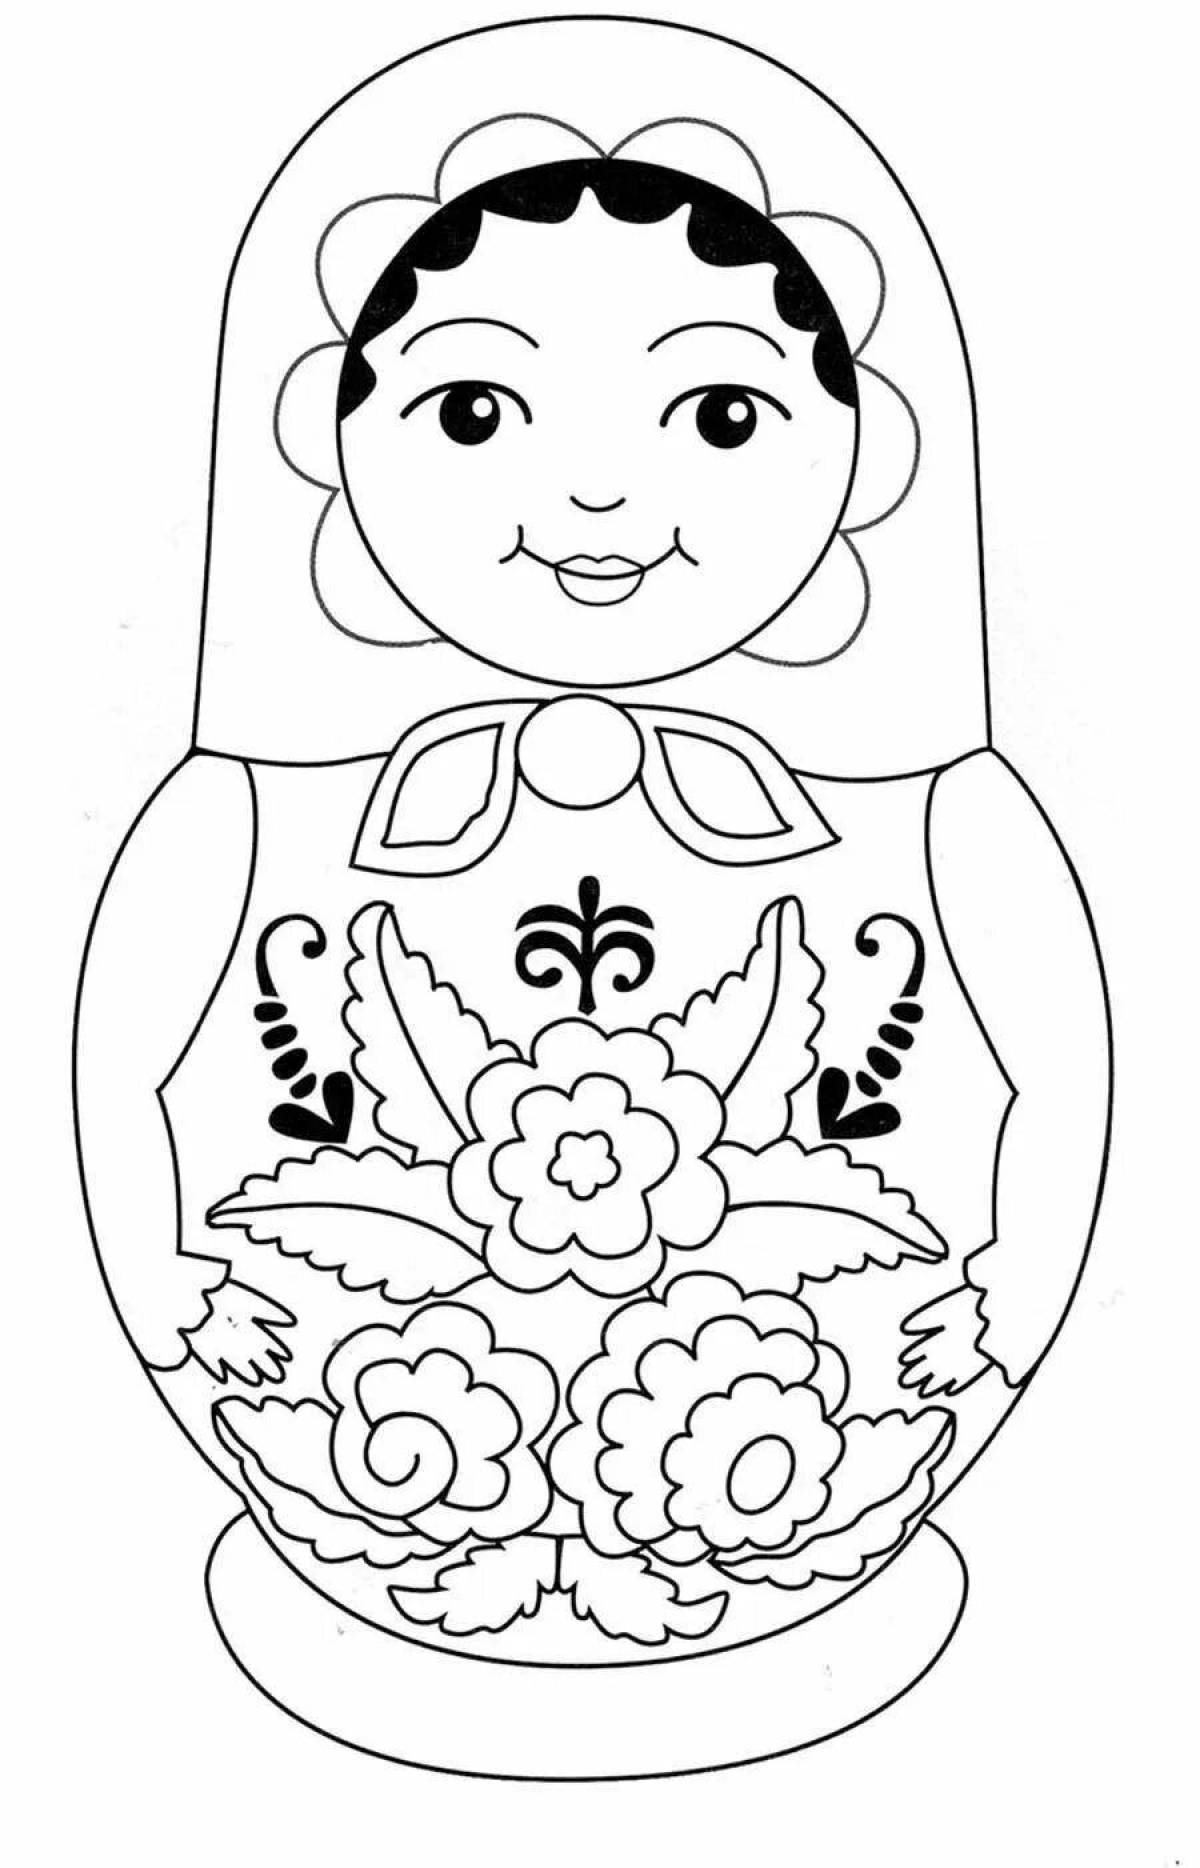 Coloring bright matryoshka by numbers